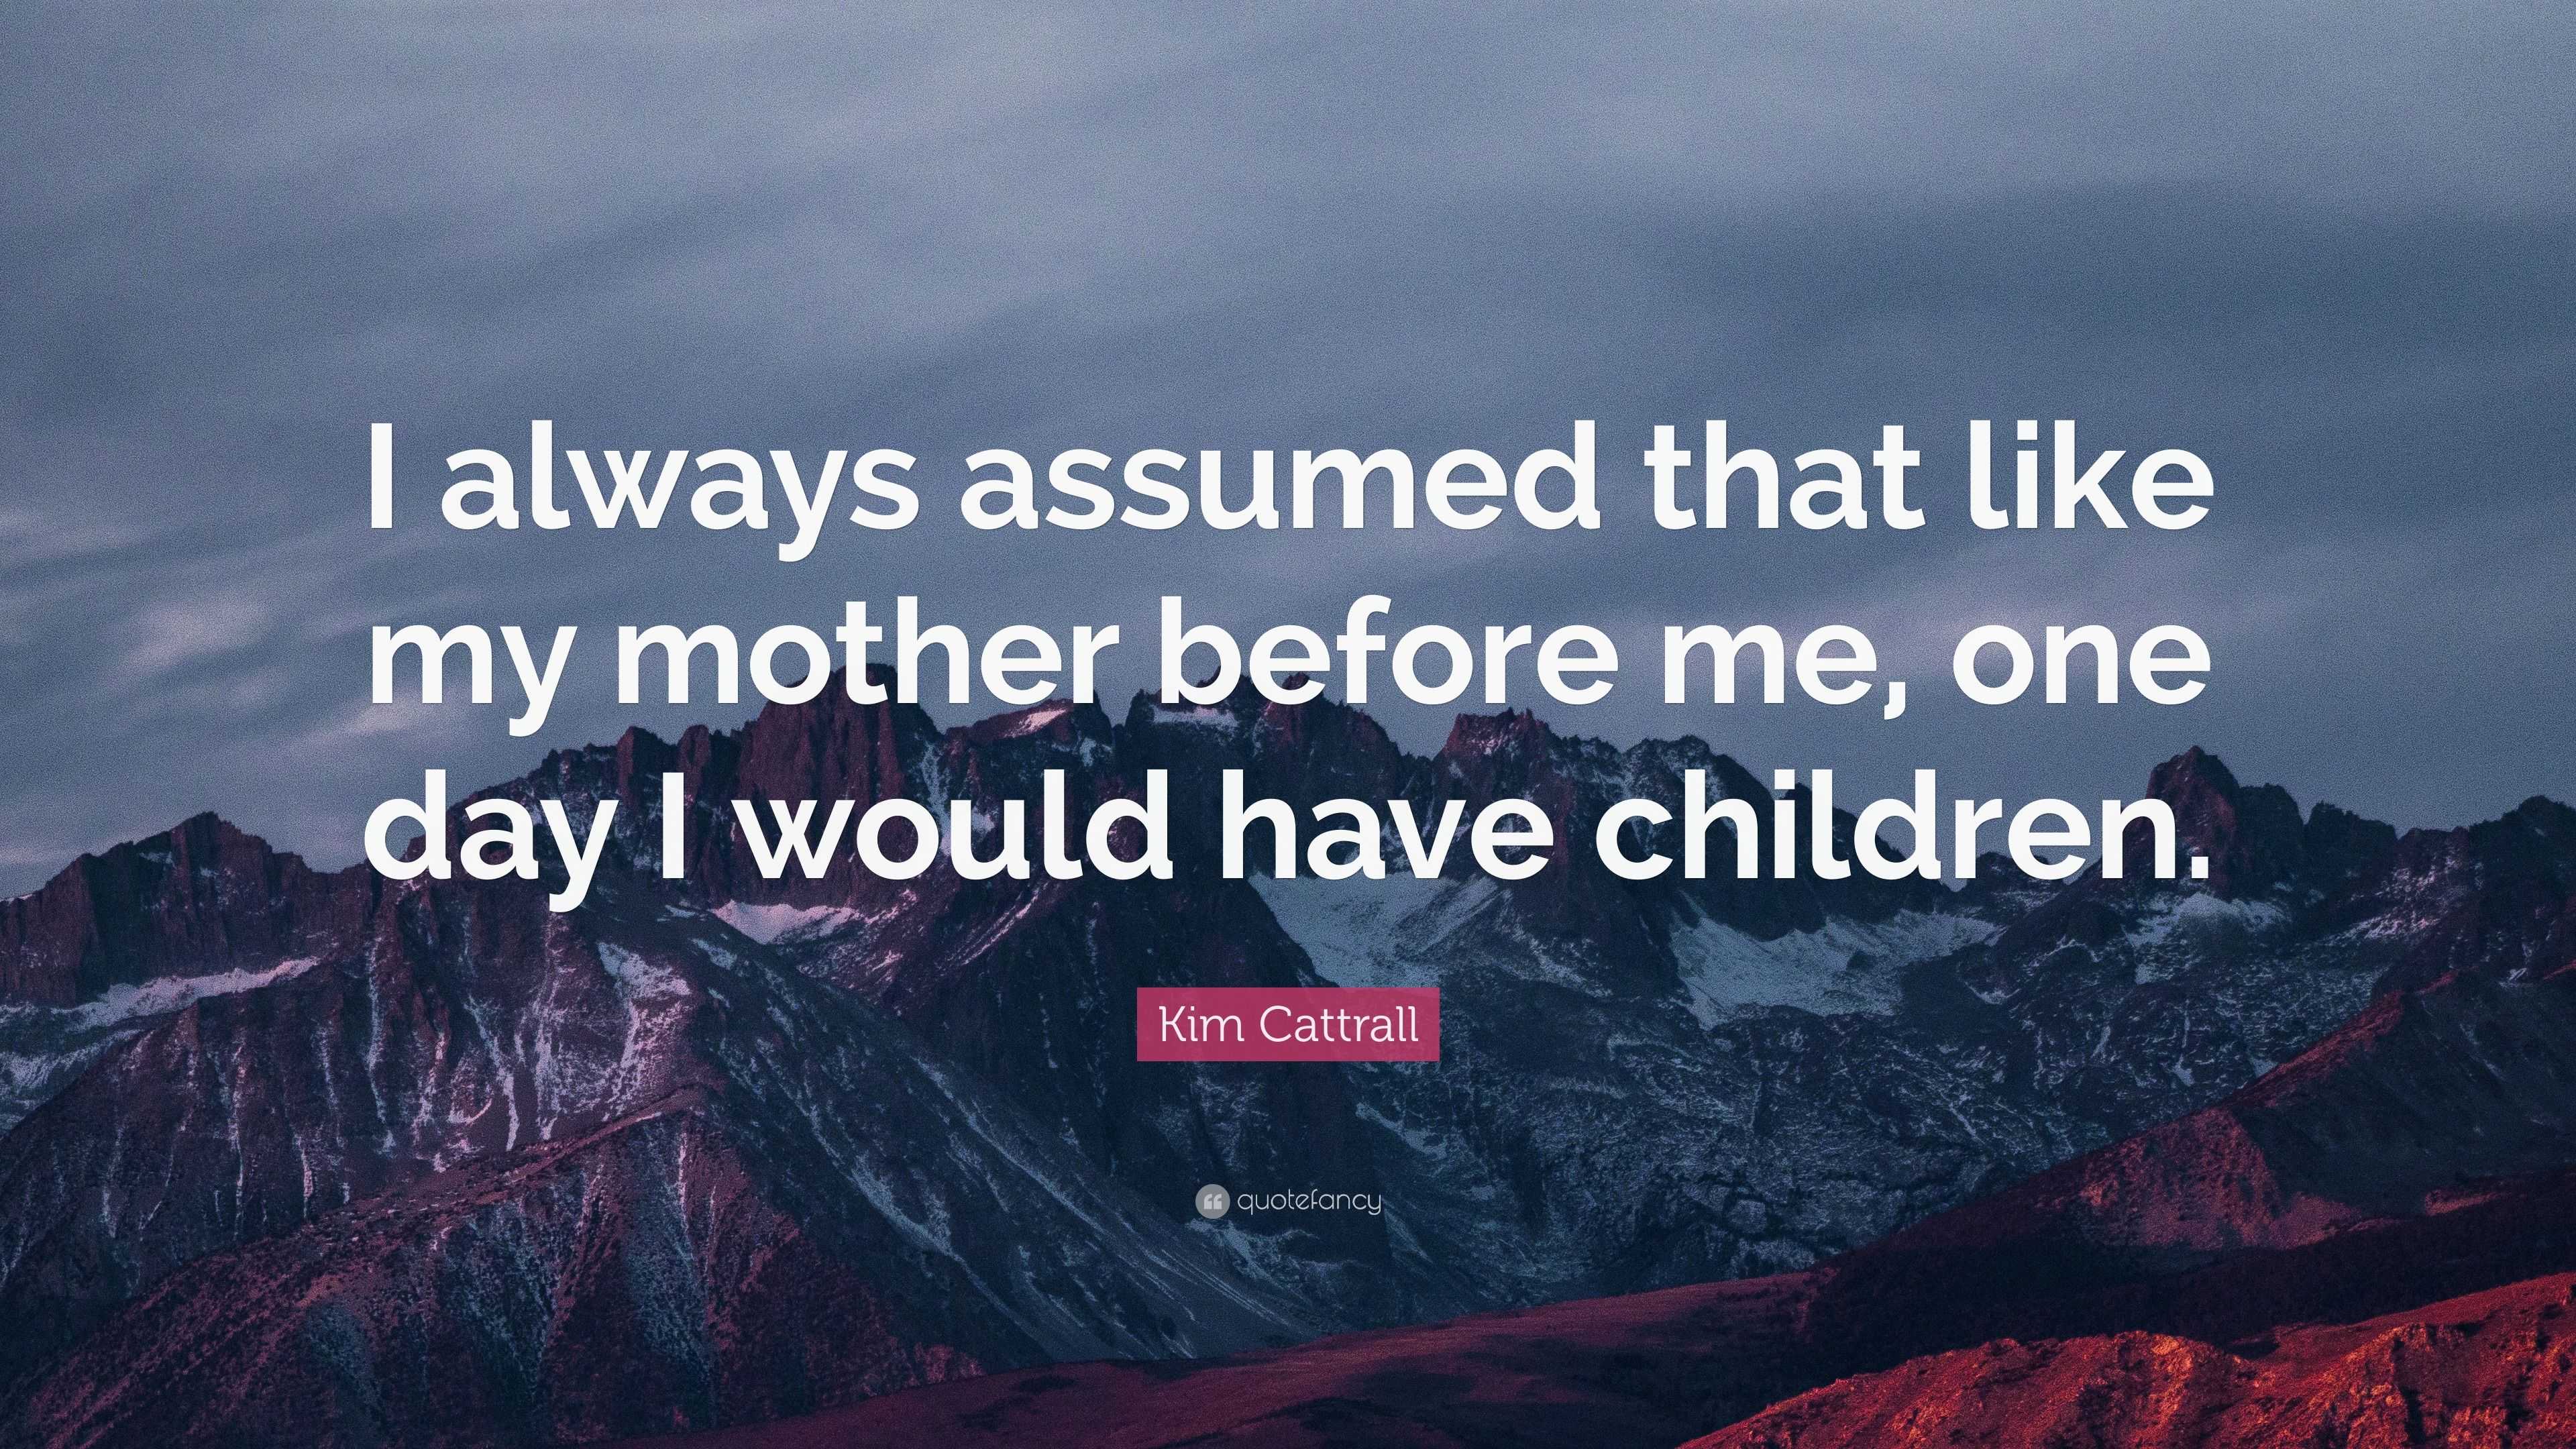 Kim Cattrall Quote: “I always assumed that like my mother before me ...